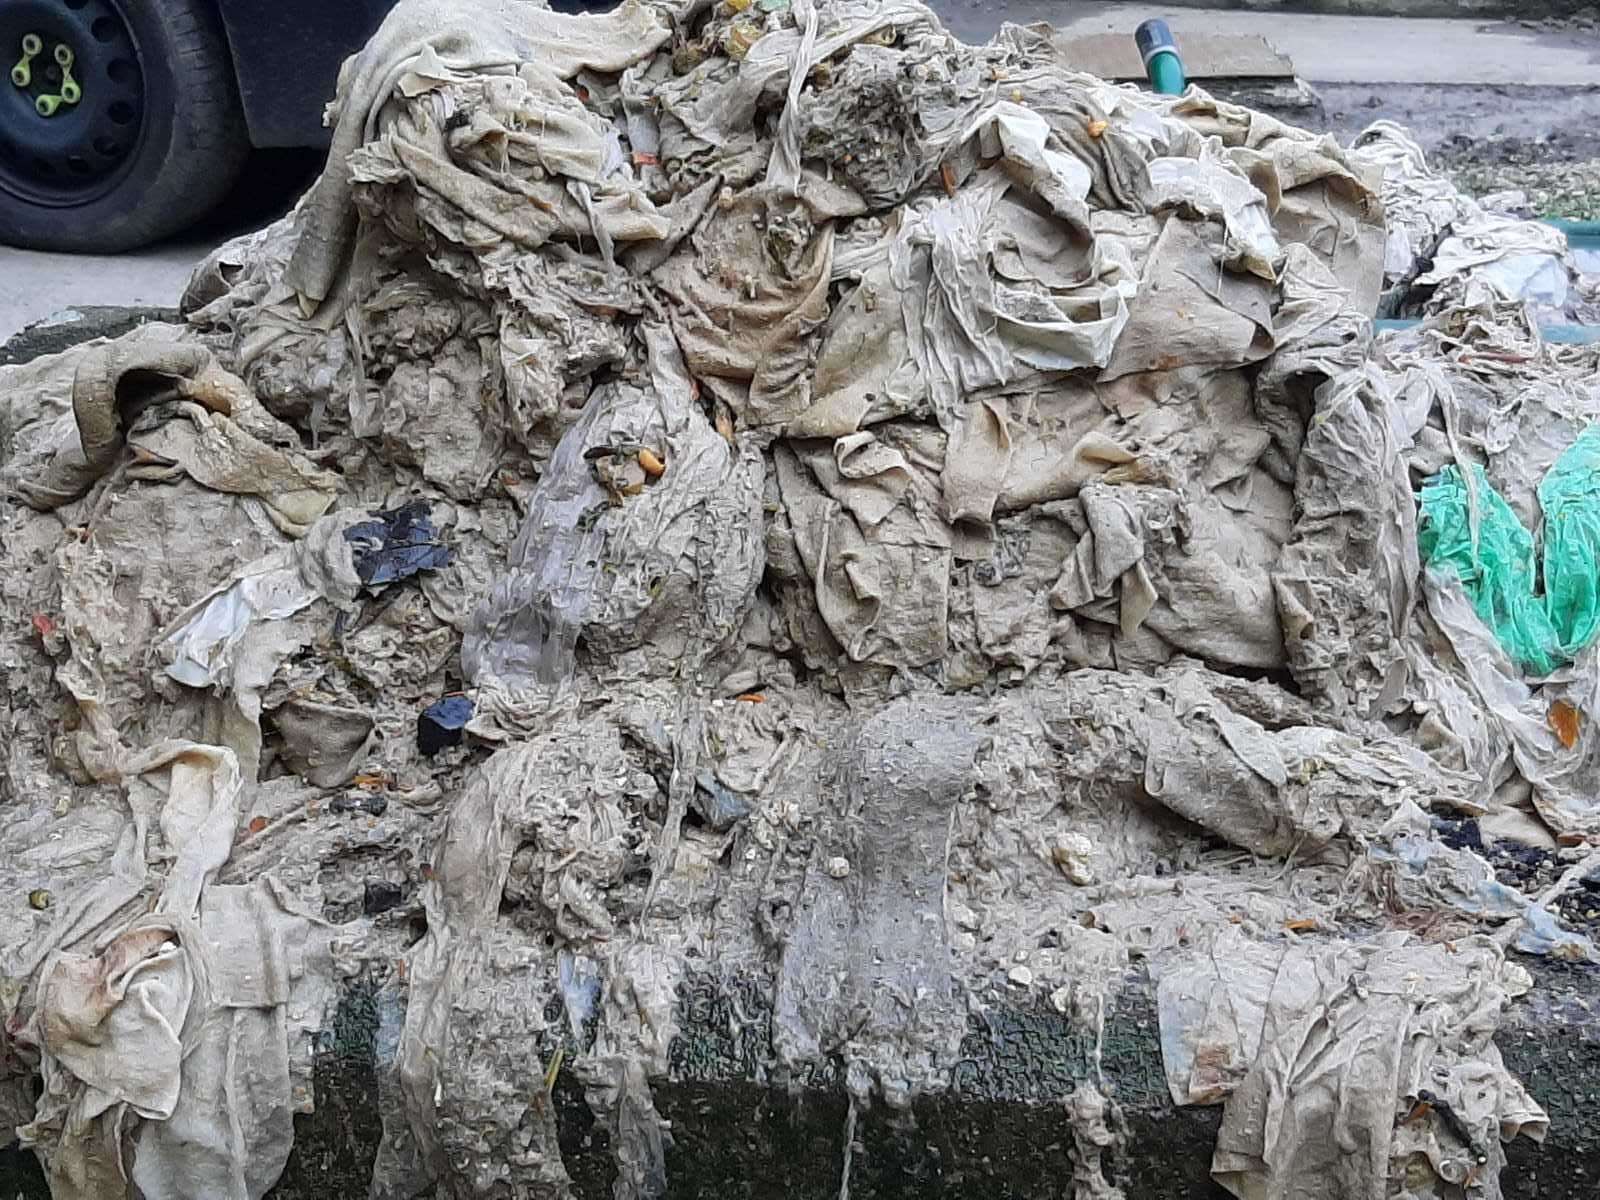 A Highland sewer blocked with wipes